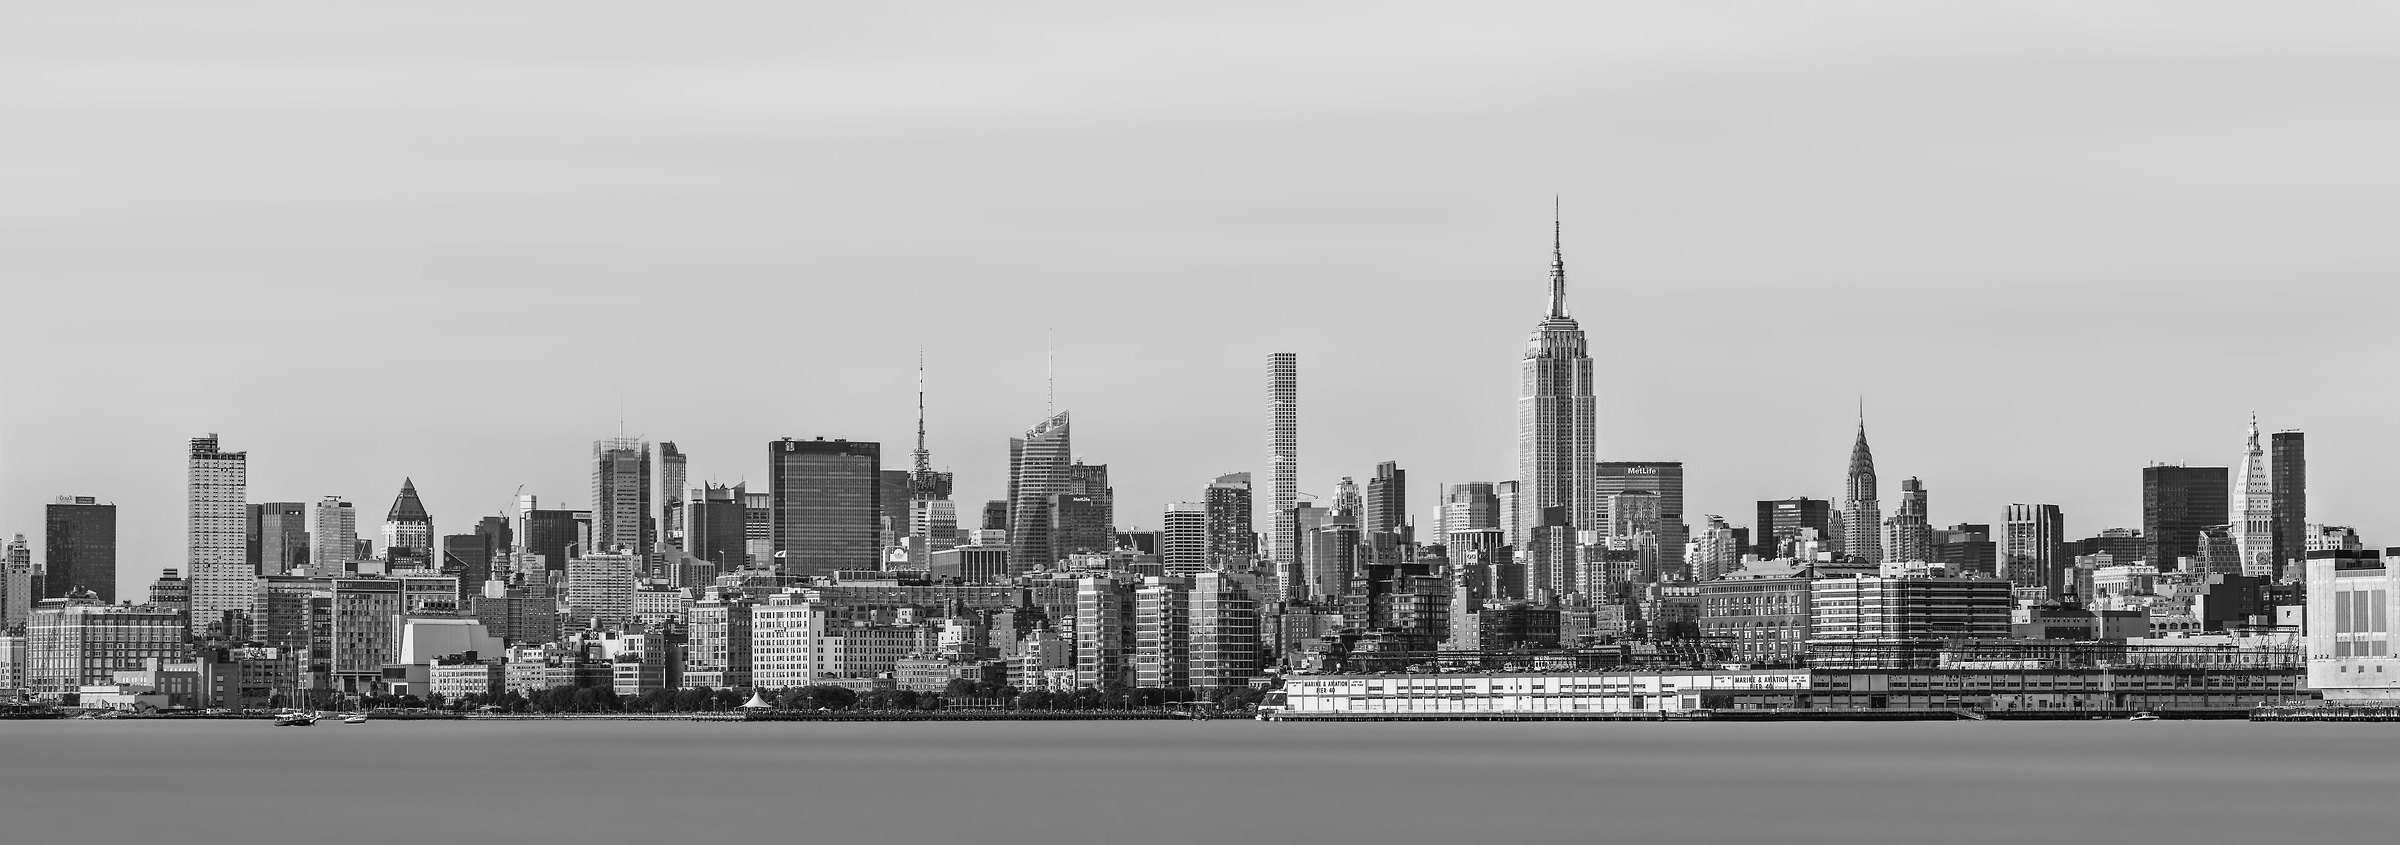 512 megapixels! A very high defintion long exposure cityscape VAST photo of the Midtown Manhattan New York City skyline and the Hudson River in black and white; created by Dan Piech